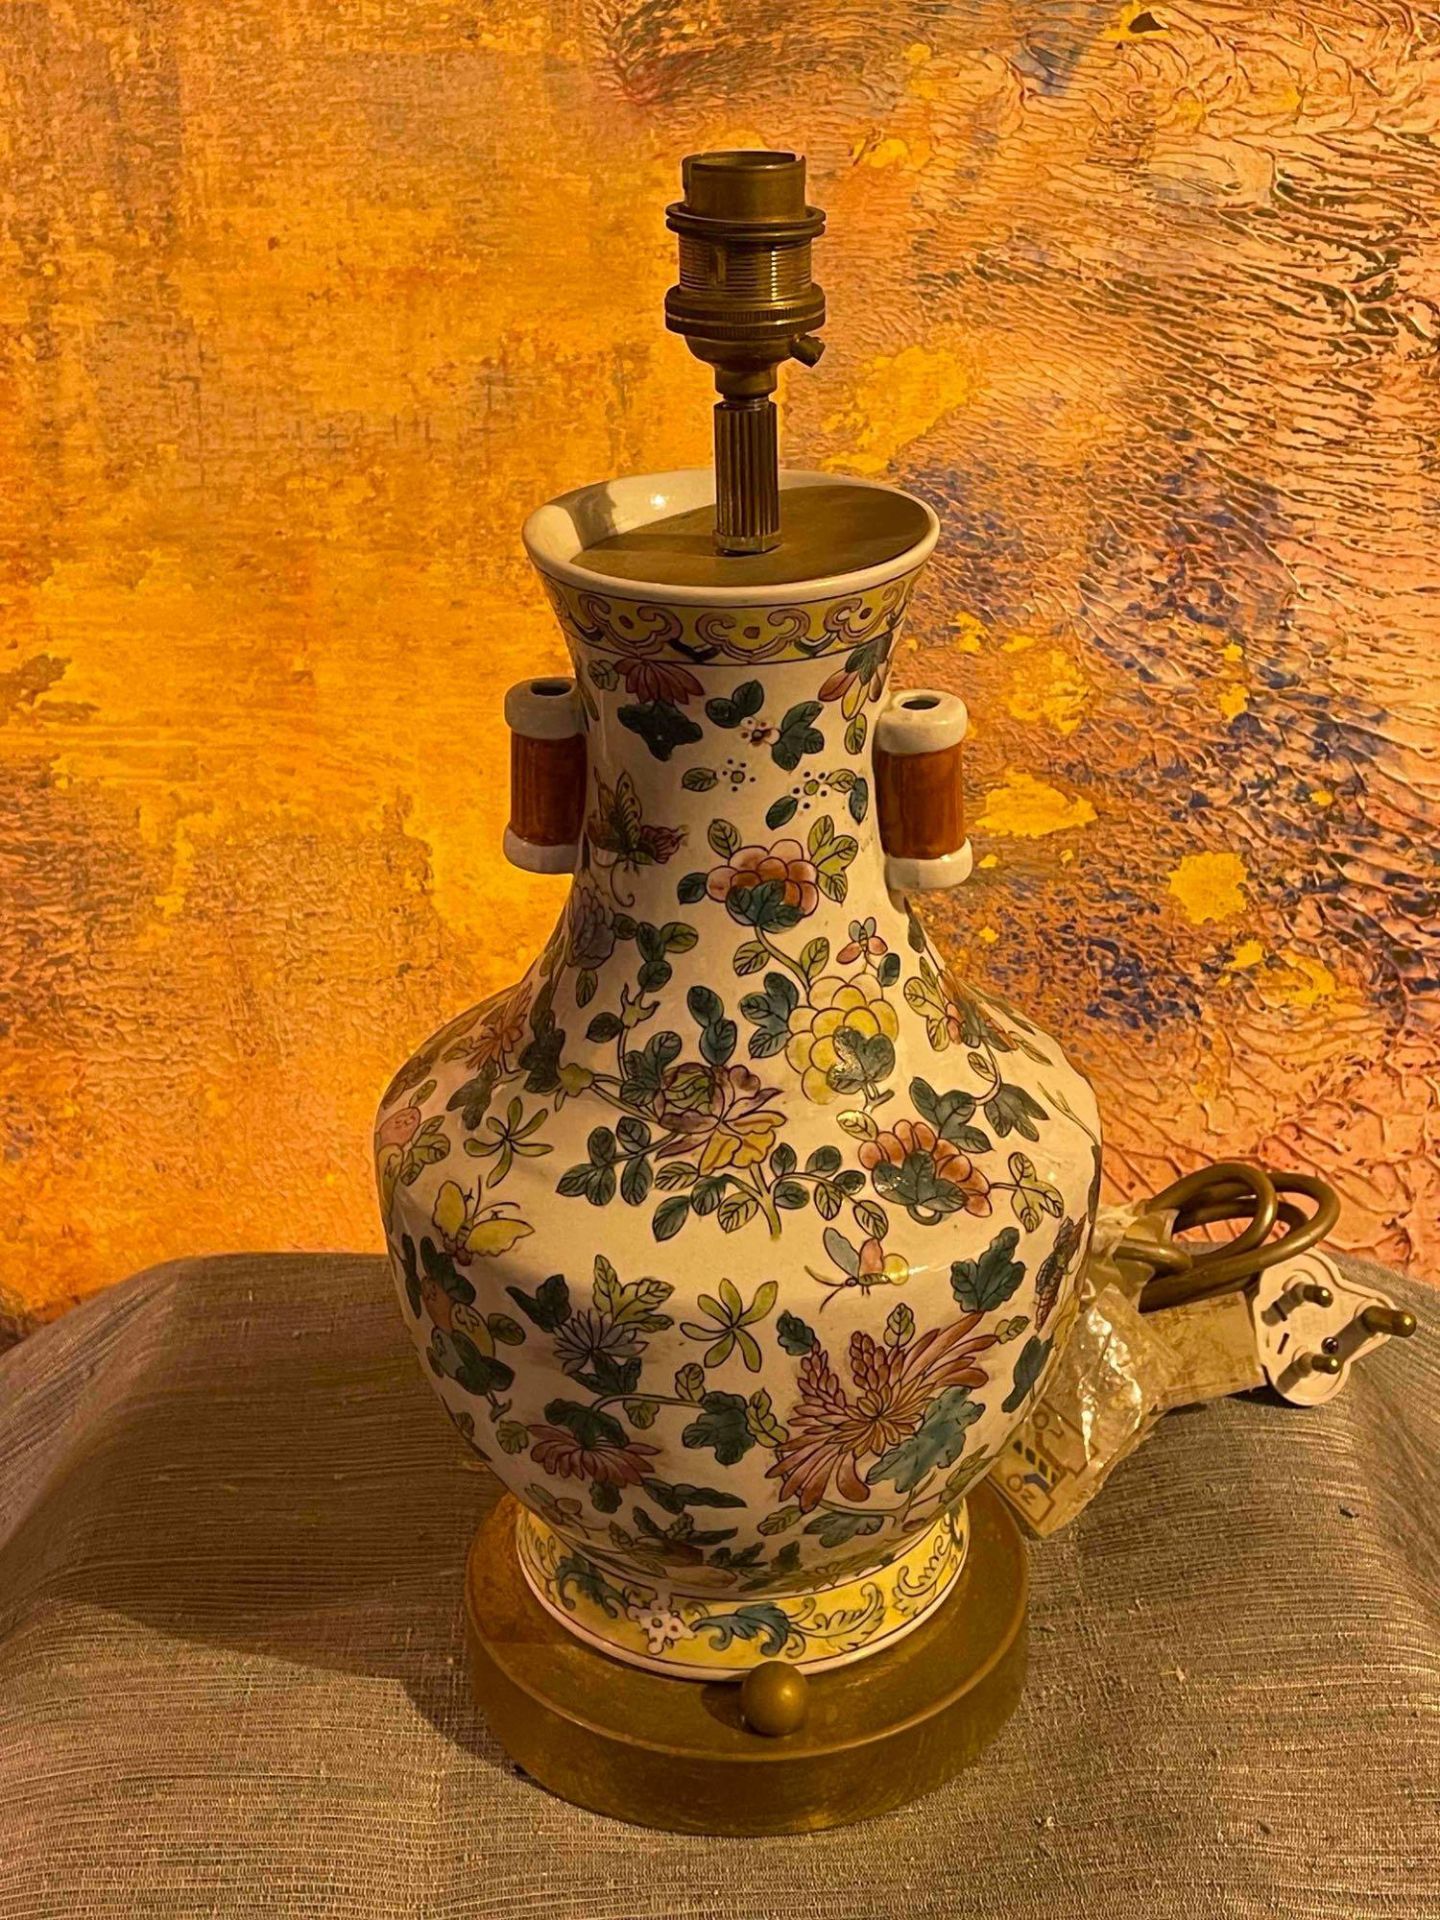 A Pair Of Chinoiserie Style Ceramic Decorative Lamps Profusely Decorated With Flowers And - Image 2 of 3